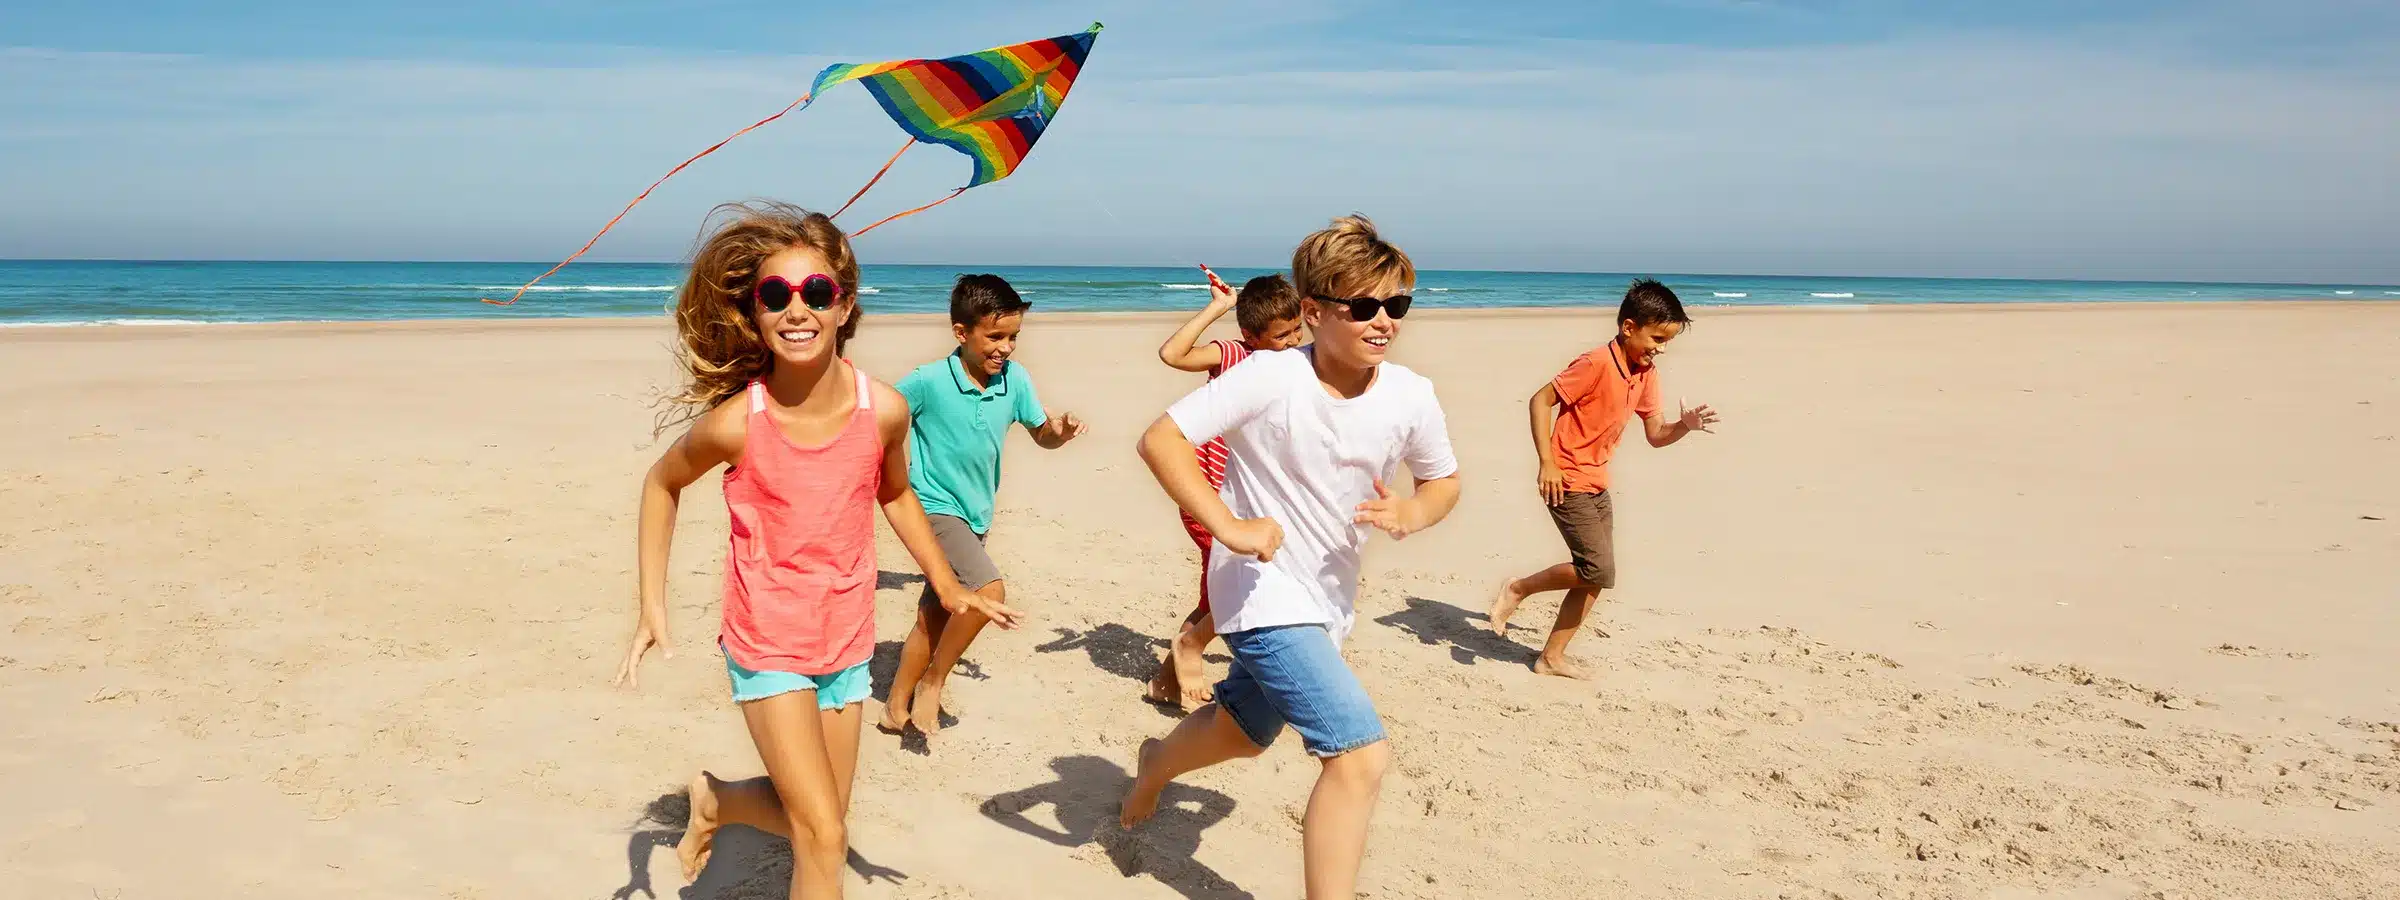 Active Languages - French Language Summer Camp in Nice